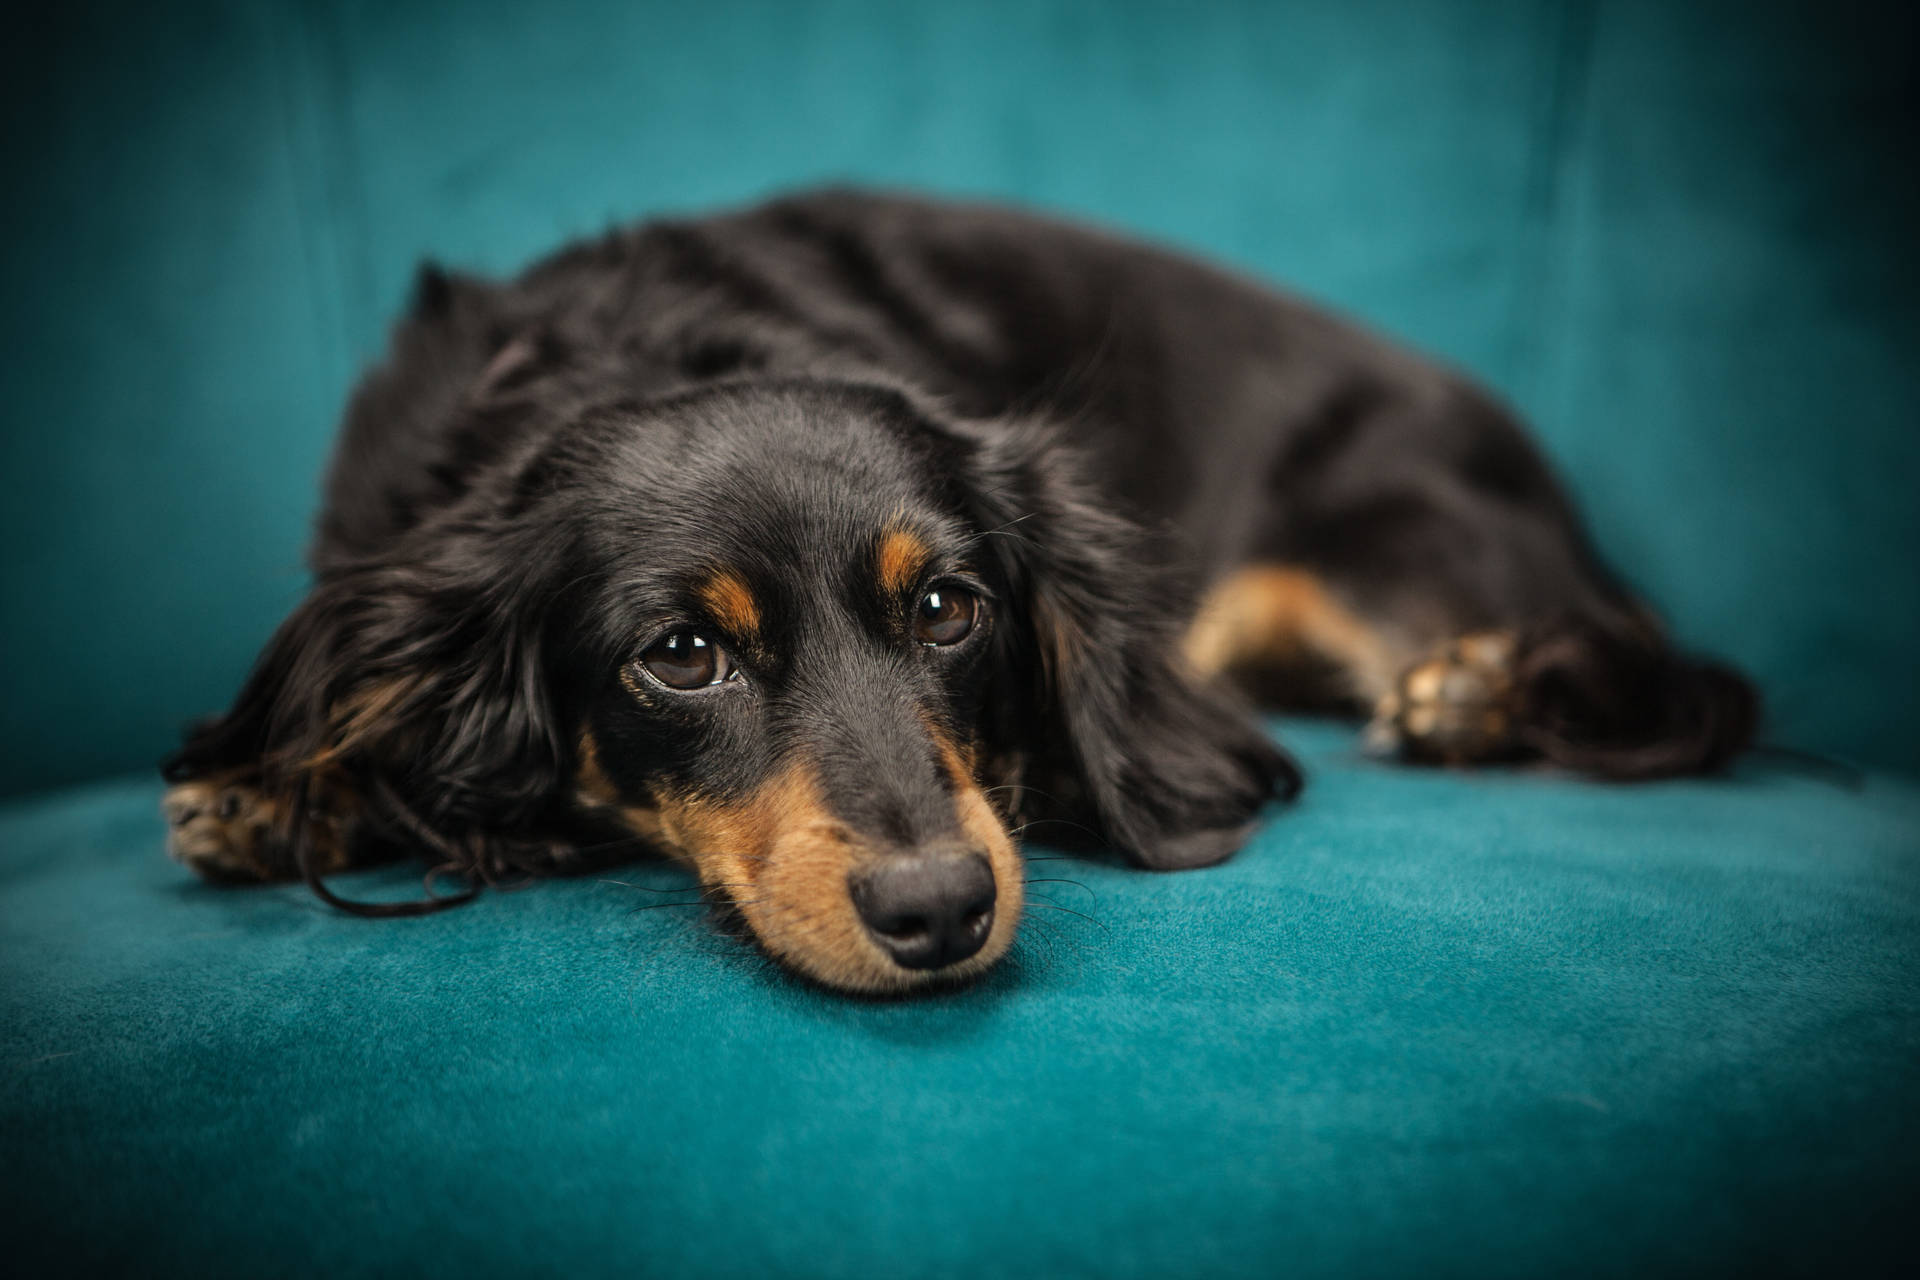 Cute Dog On Blue Couch